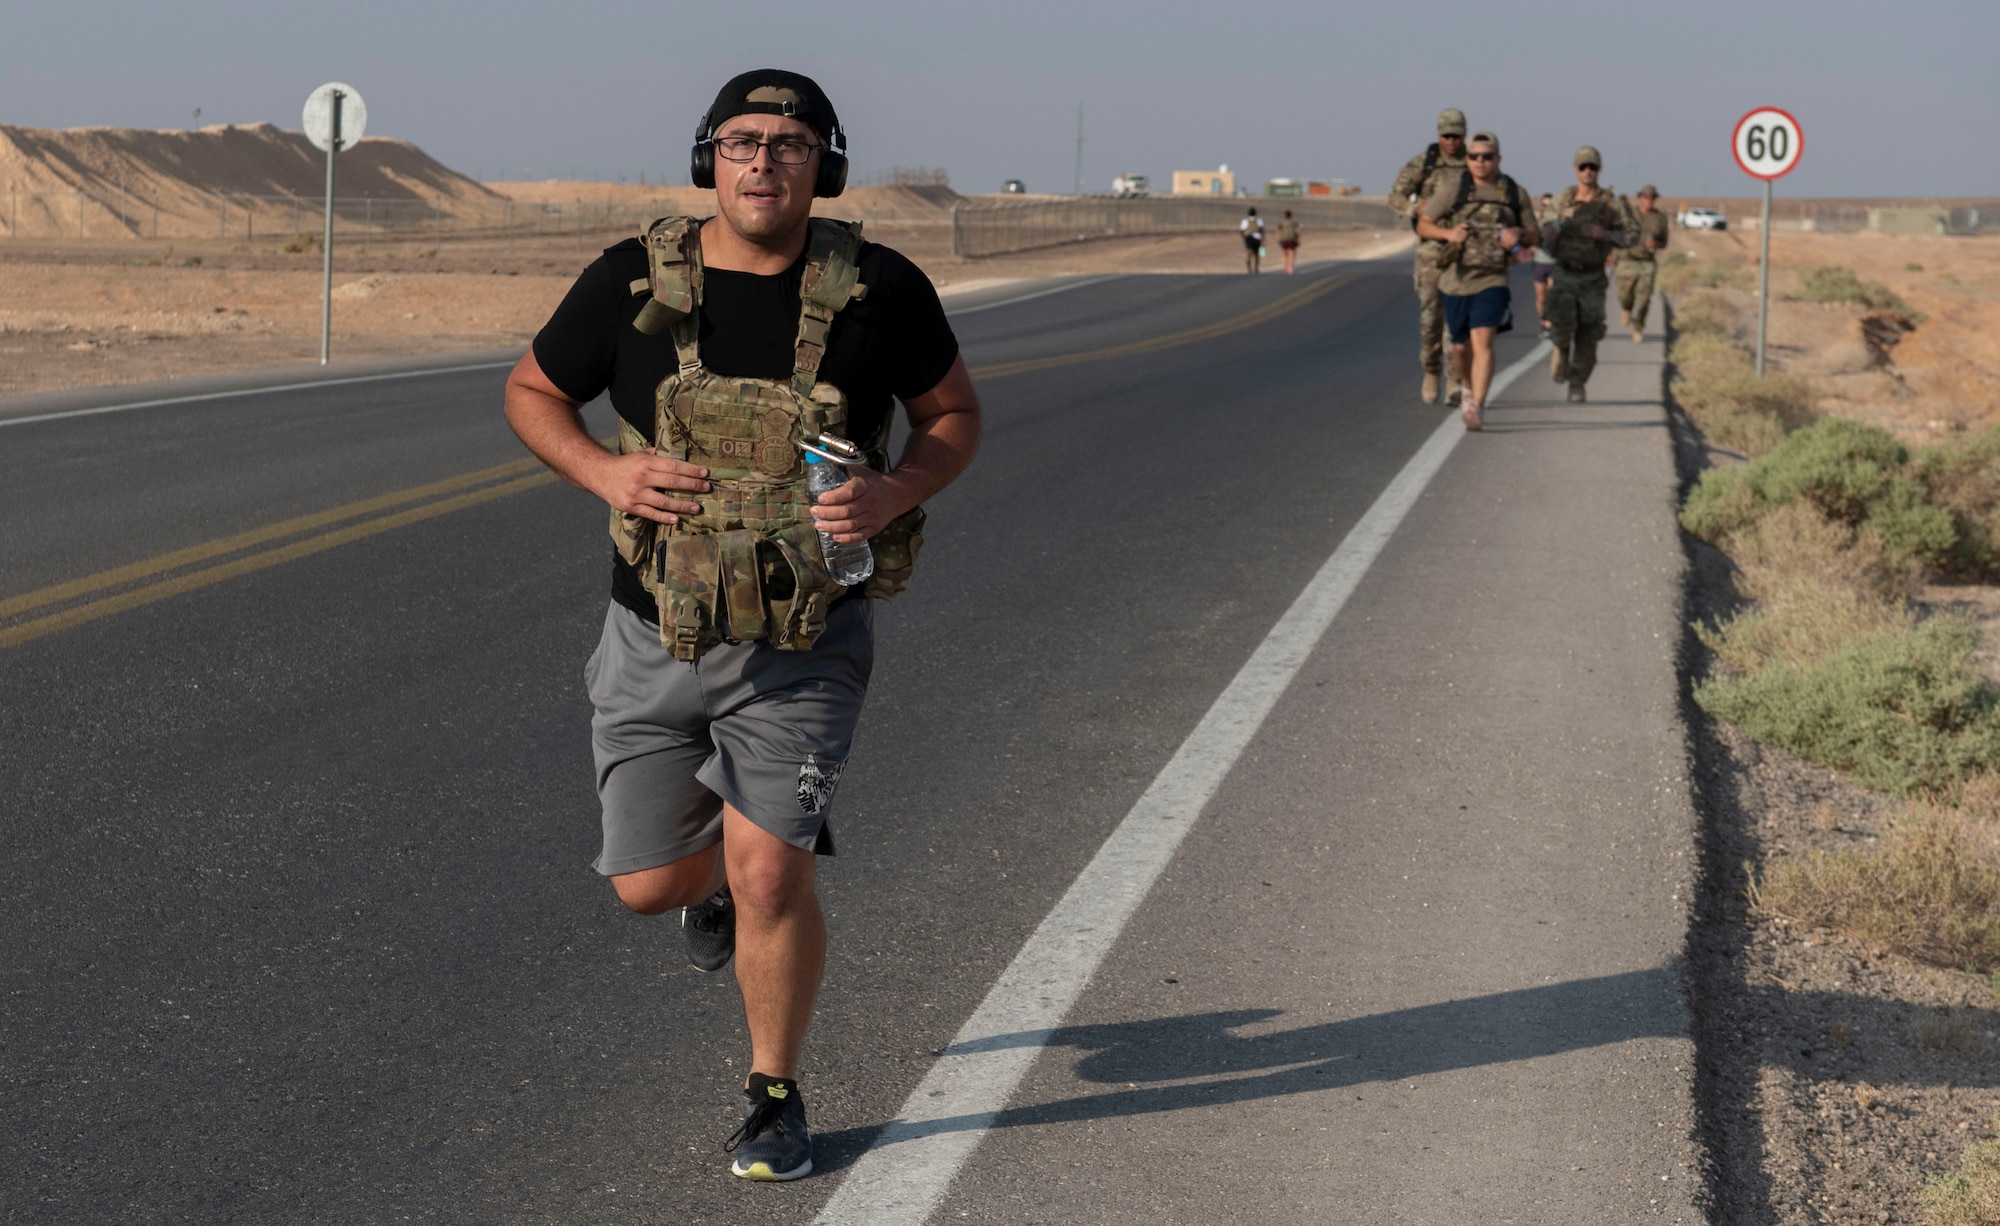 “The Red Tail Defenders Association launched a 31 mile ruck to commemorate the fallen warriors from that mission” says Staff Sergeant Beatriz Munoz, 332d Security Forces Squadron, Combined Defense Operation Center Controller, who participated in the ruck. The ruck started Sunday, Aug 7th, 2022 at 0630 at the passenger terminal. The intention was to ruck 6.2 miles Sunday through the following Thursday. Participants were highly encouraged to wear additional weight on their bodies as those that were lost were in combat battle gear. Every morning, before each ruck, volunteers started by reading the backstory of six individuals killed during the mission and proceeded to ruck.